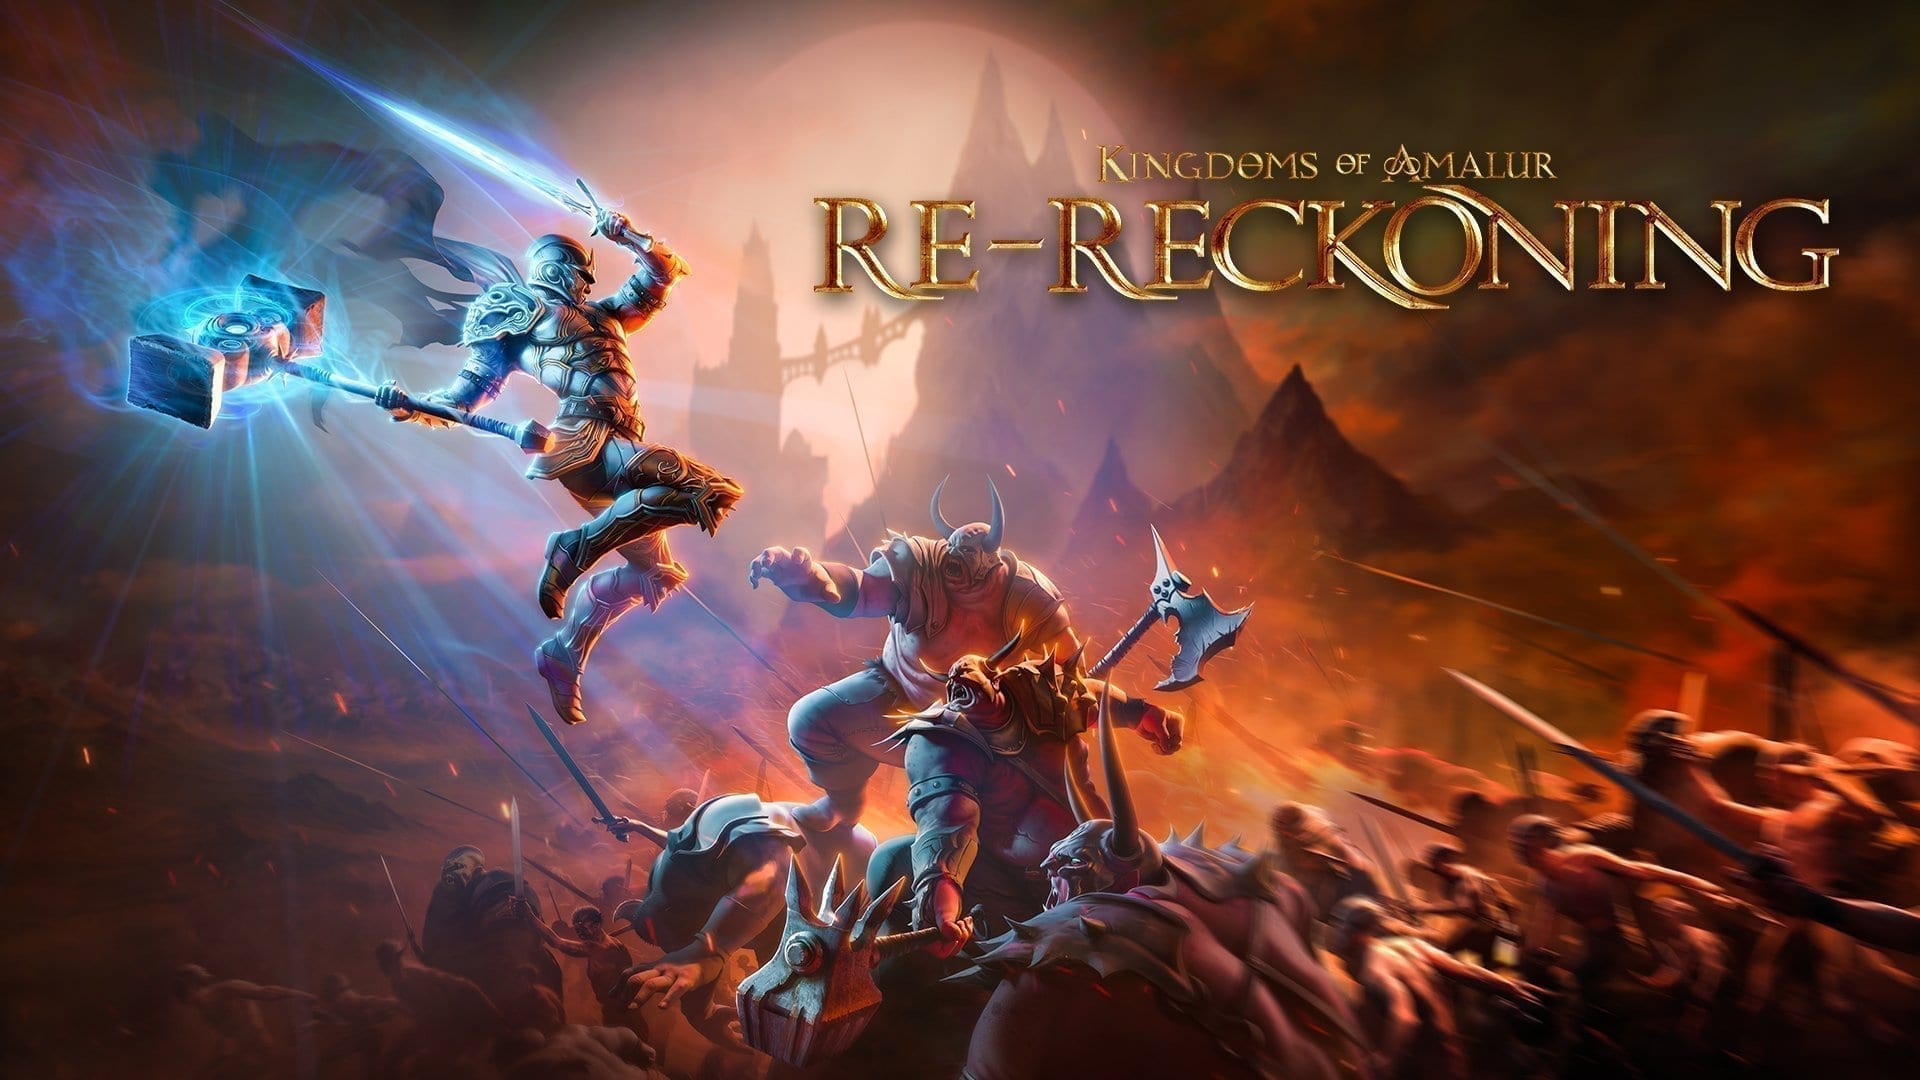 Kingdoms of Amalur: Re-Reckoning Will Release This August